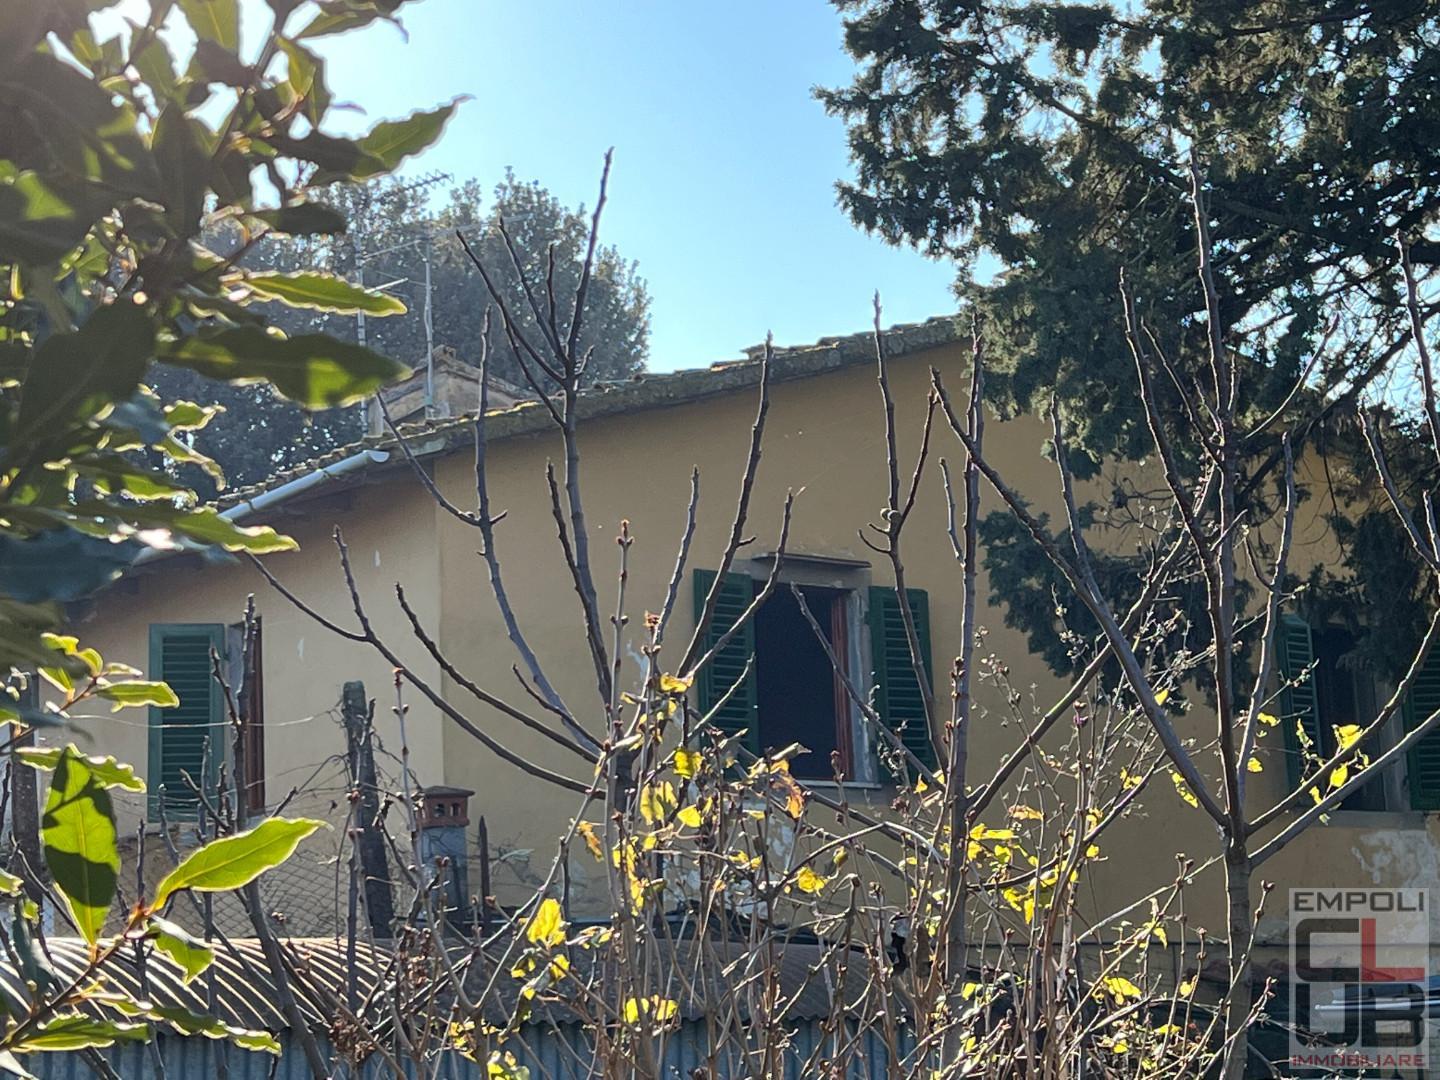 Portion of house for sale in Empoli (FI)